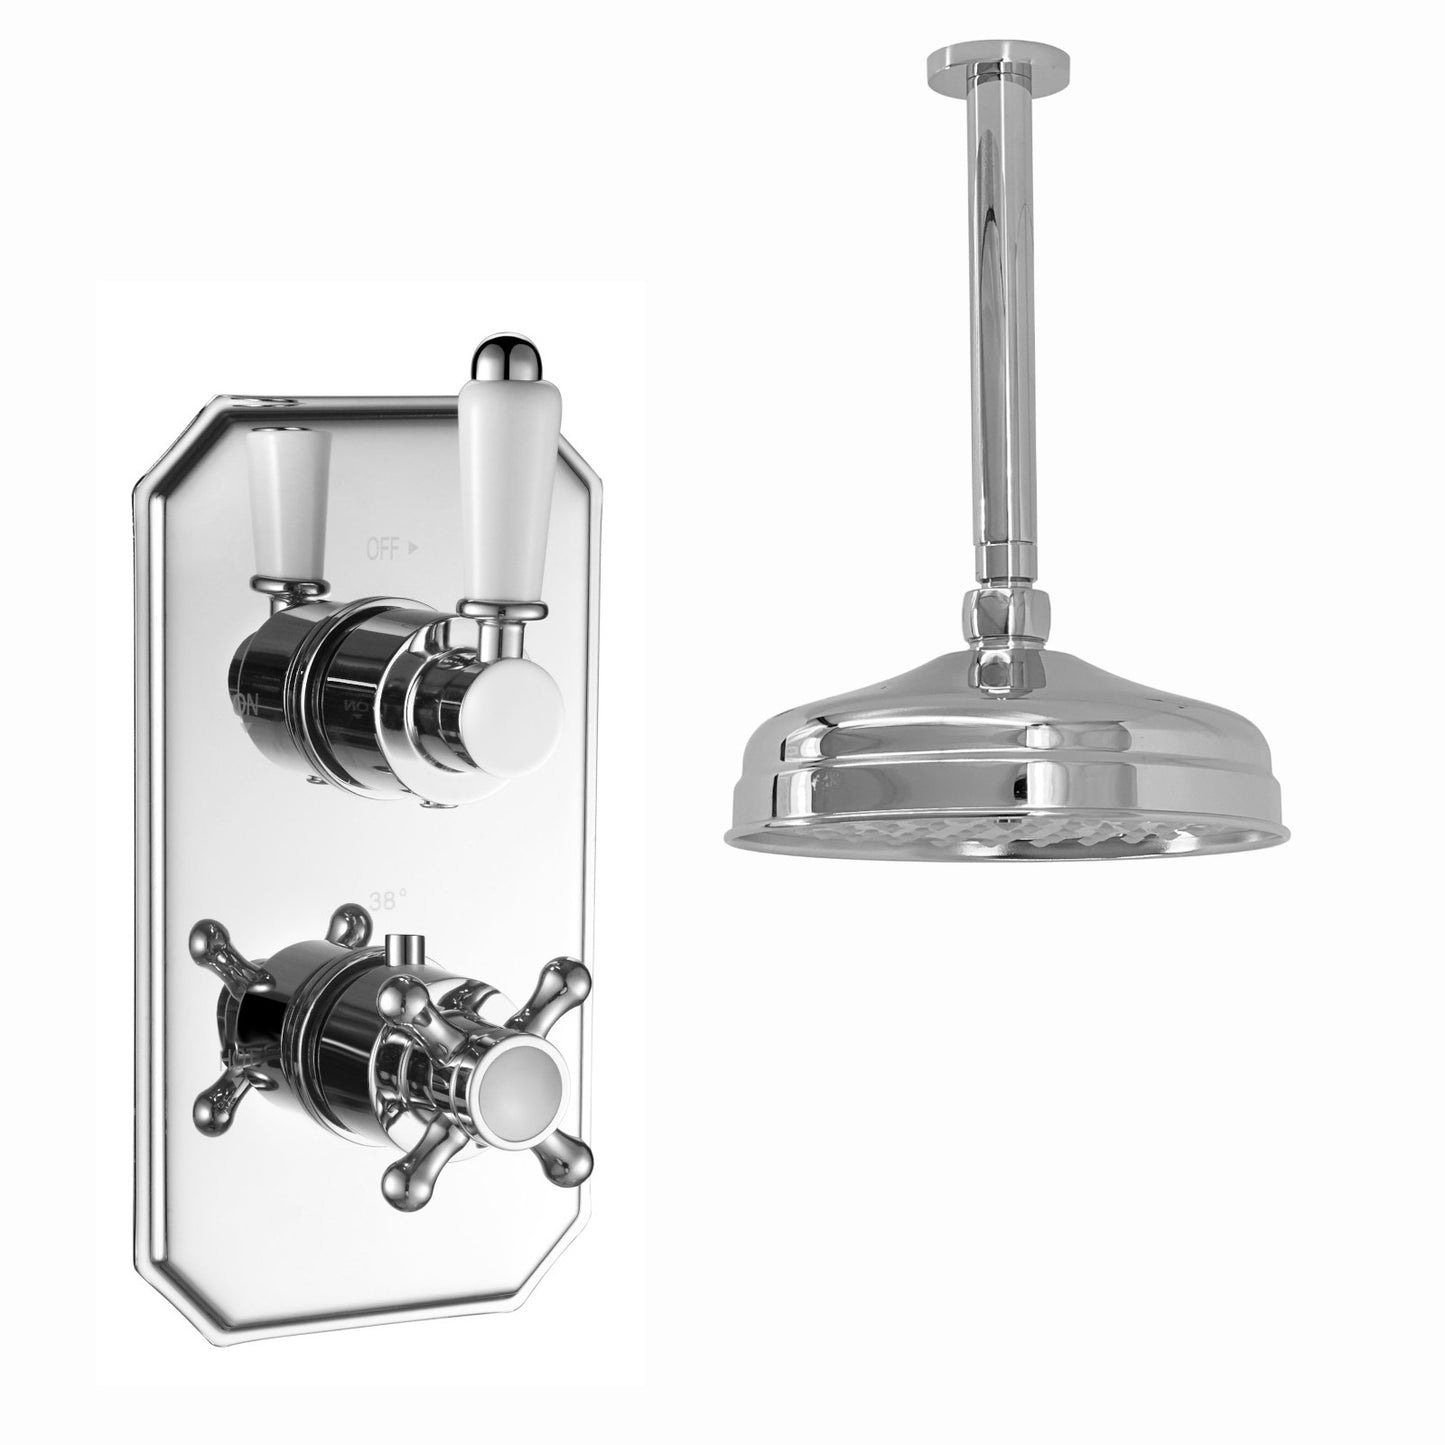 SH0249-01-regent-traditional-crosshead-and-white-lever-concealed-thermostatic-shower-set-ceiling-fixed-8-shower-head-chrome-1-outlet